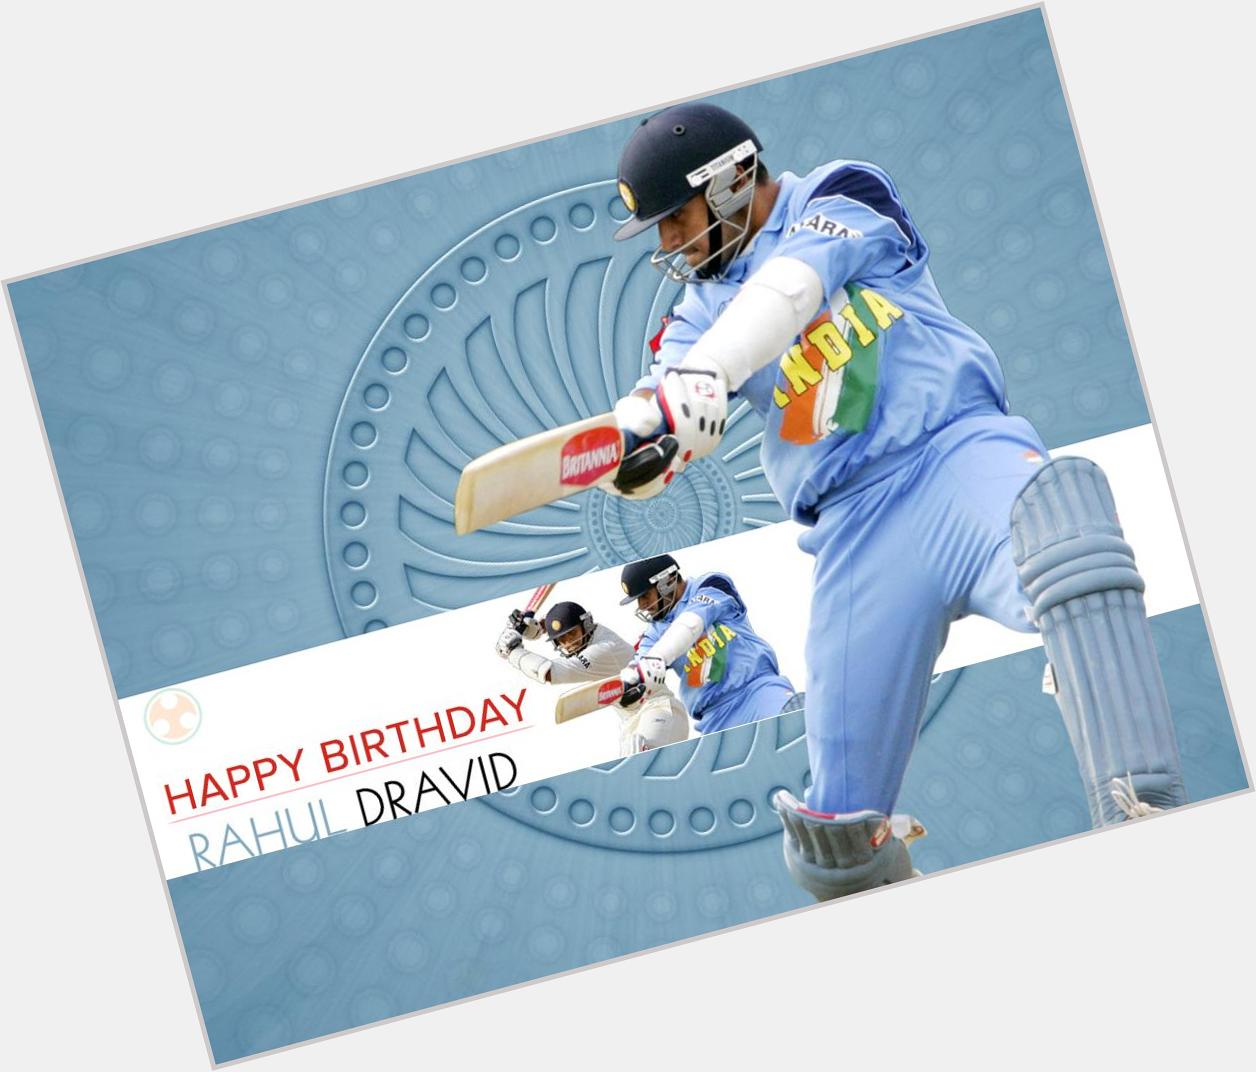 Yuva Desh wishes a very Happy Birthday to the legendary Rahul Dravid, \The Wall\ of Indian Cricket. 